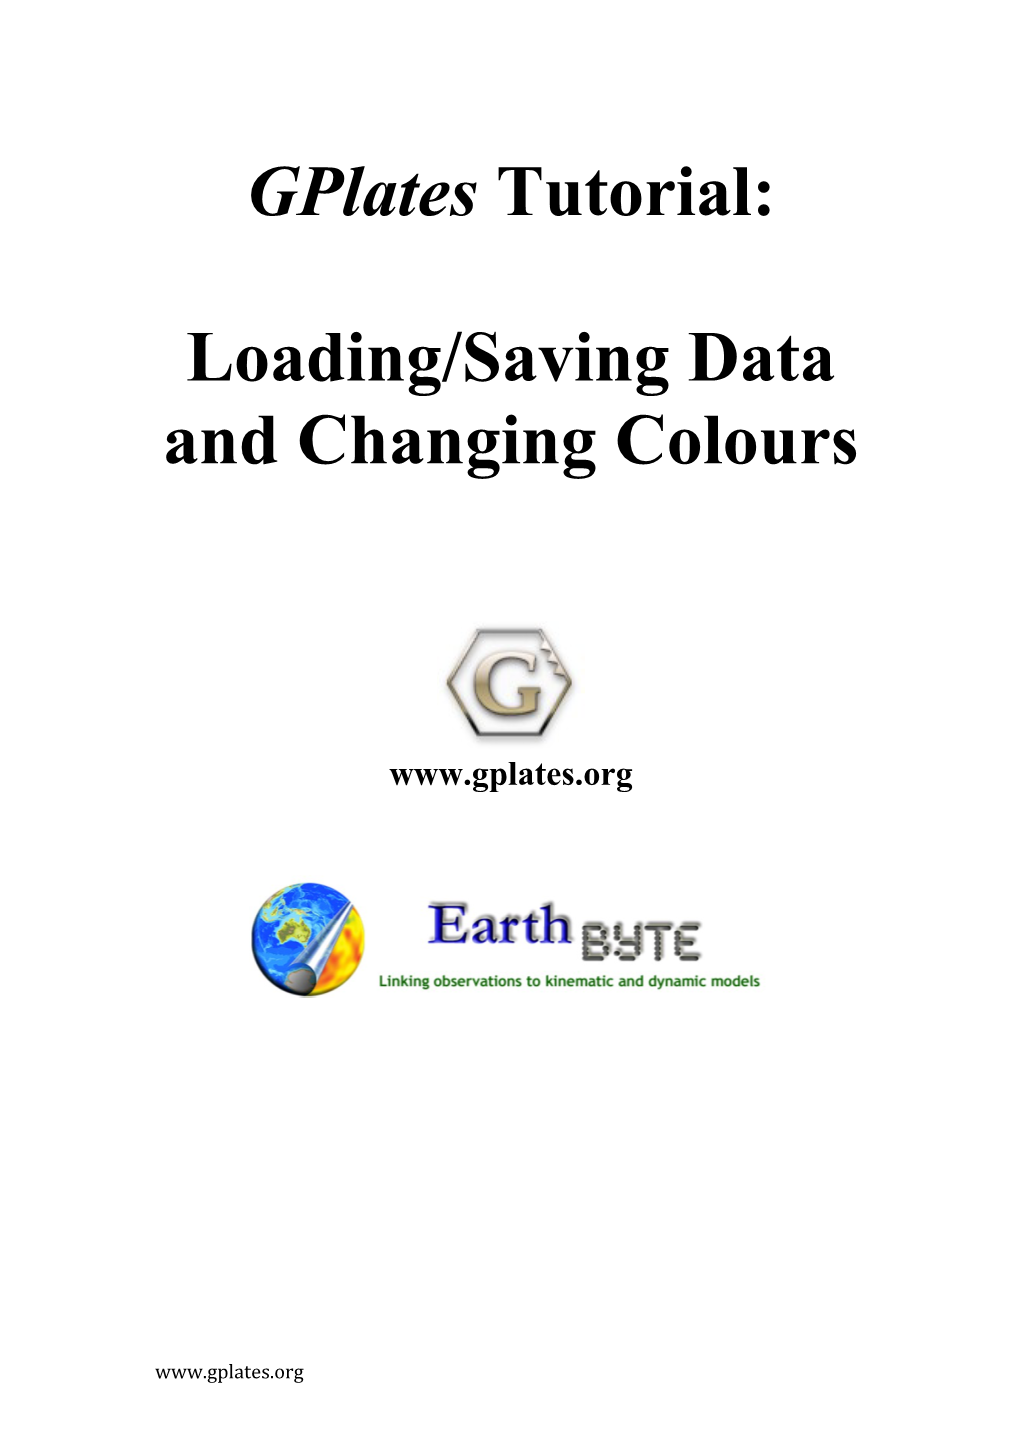 Loading/Saving Data and Changing Colours